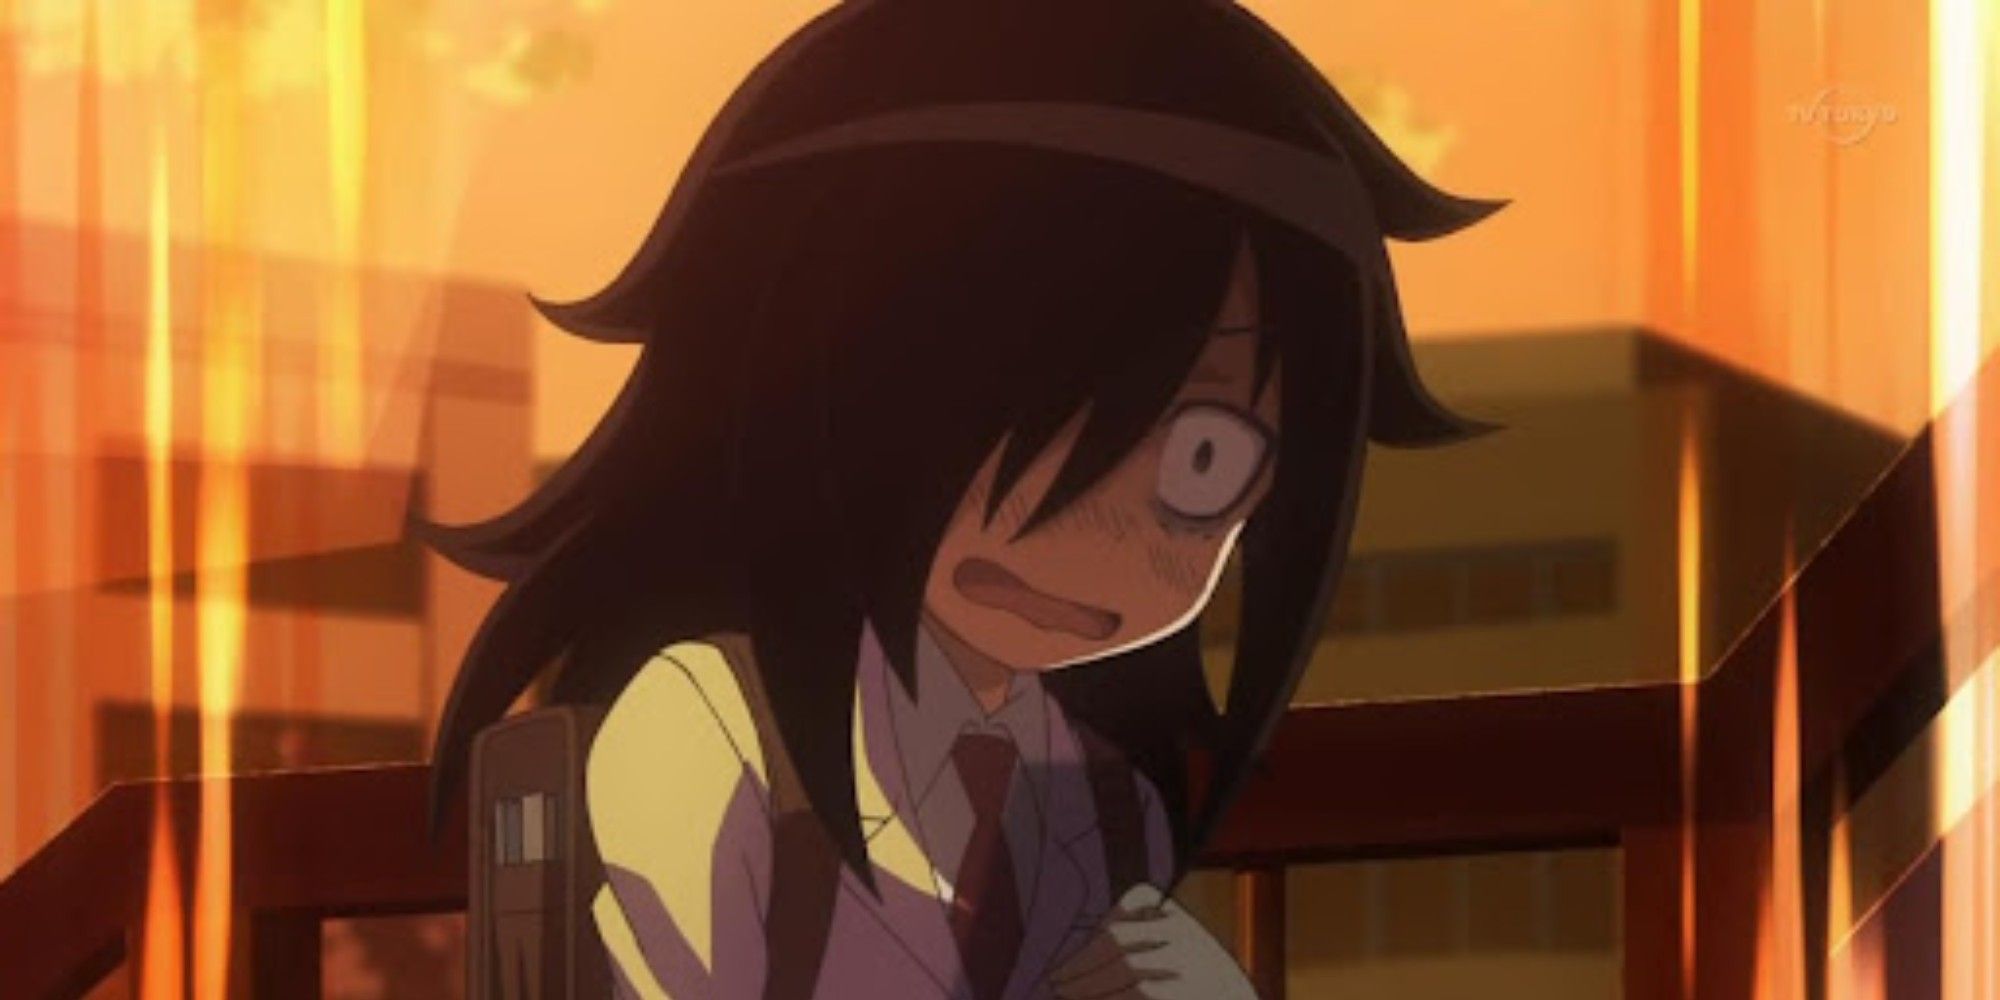 Watamote tomoko in her usual state